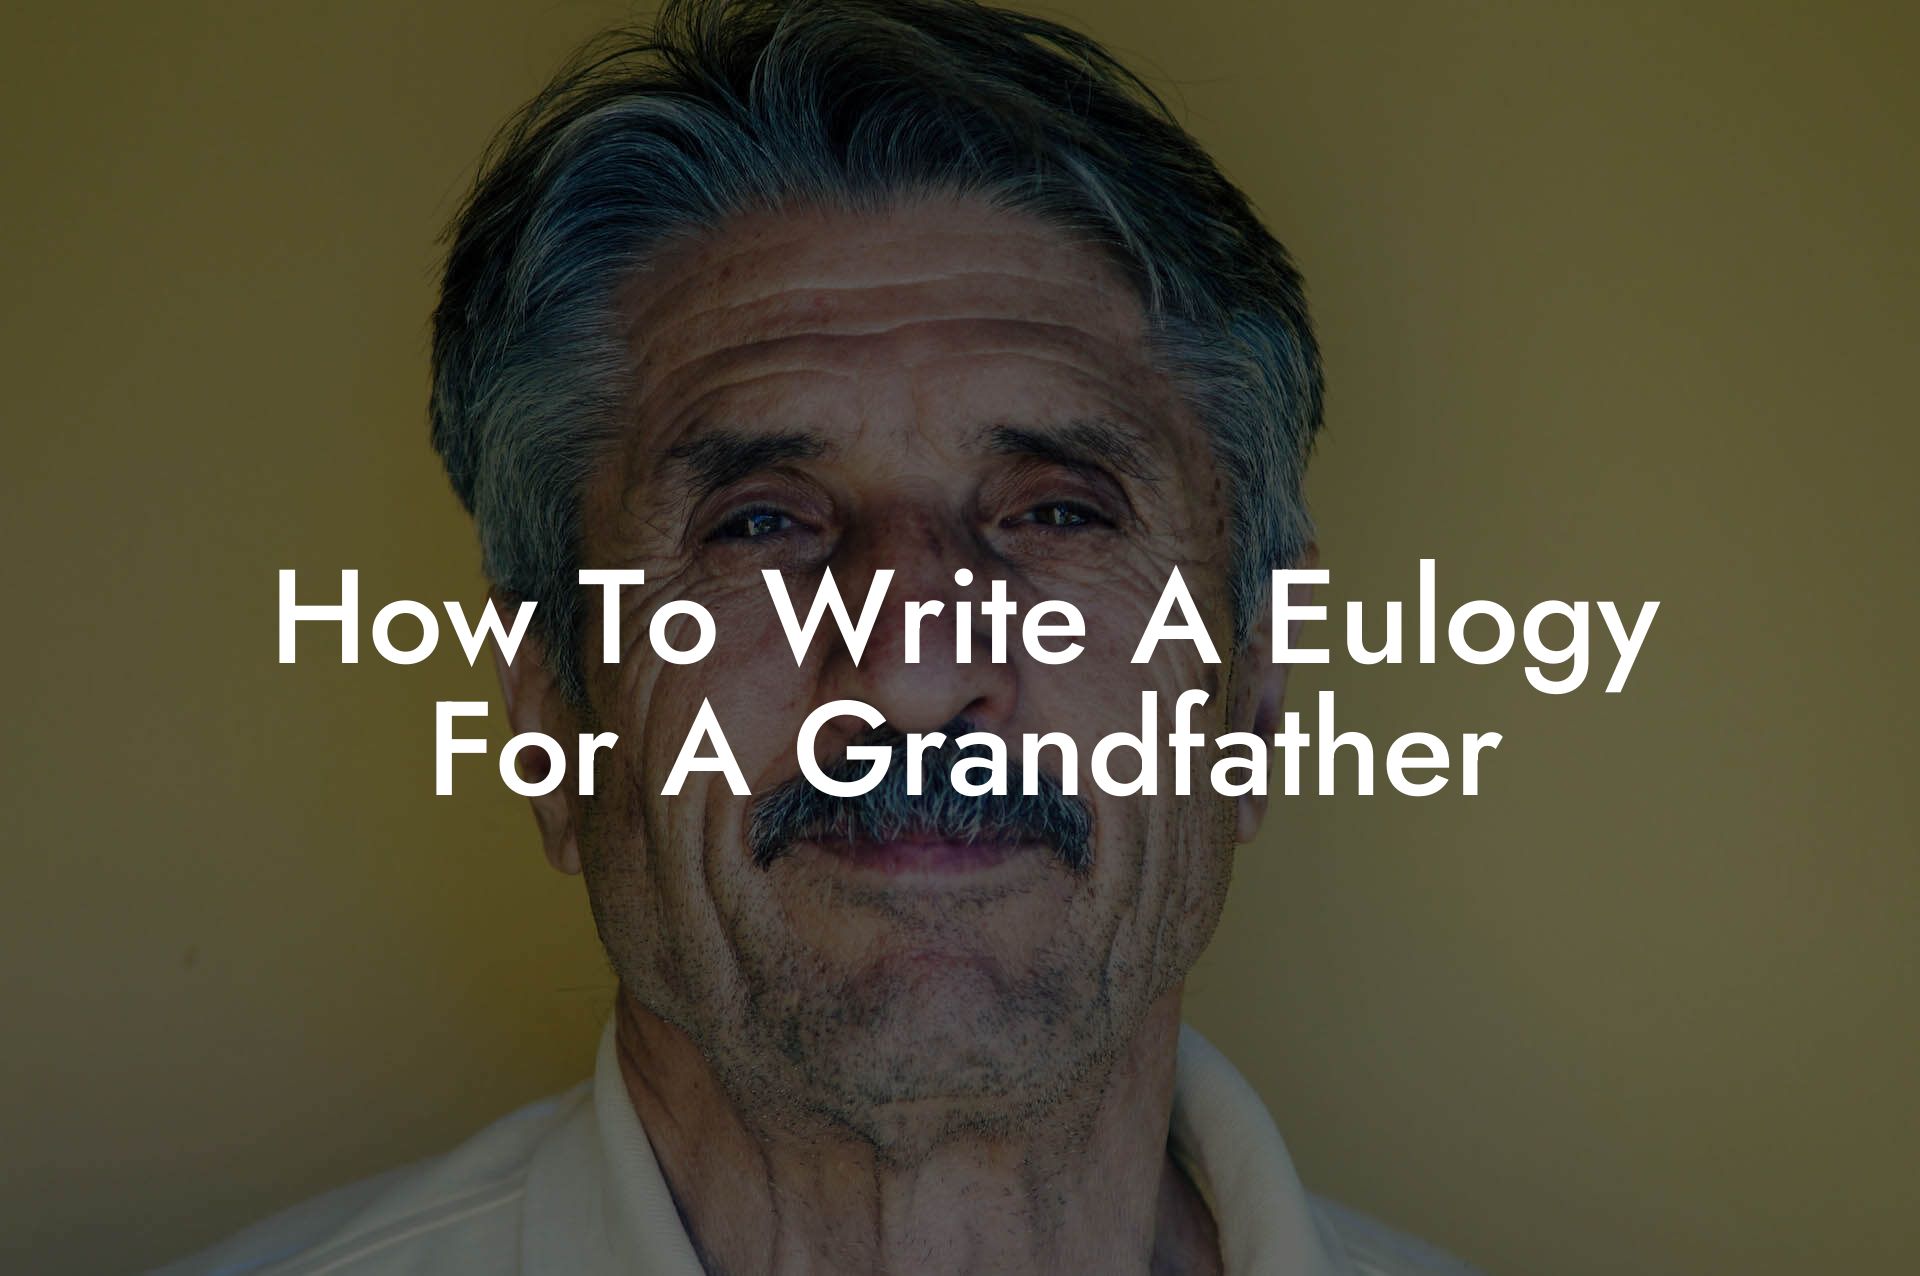 How To Write A Eulogy For A Grandfather